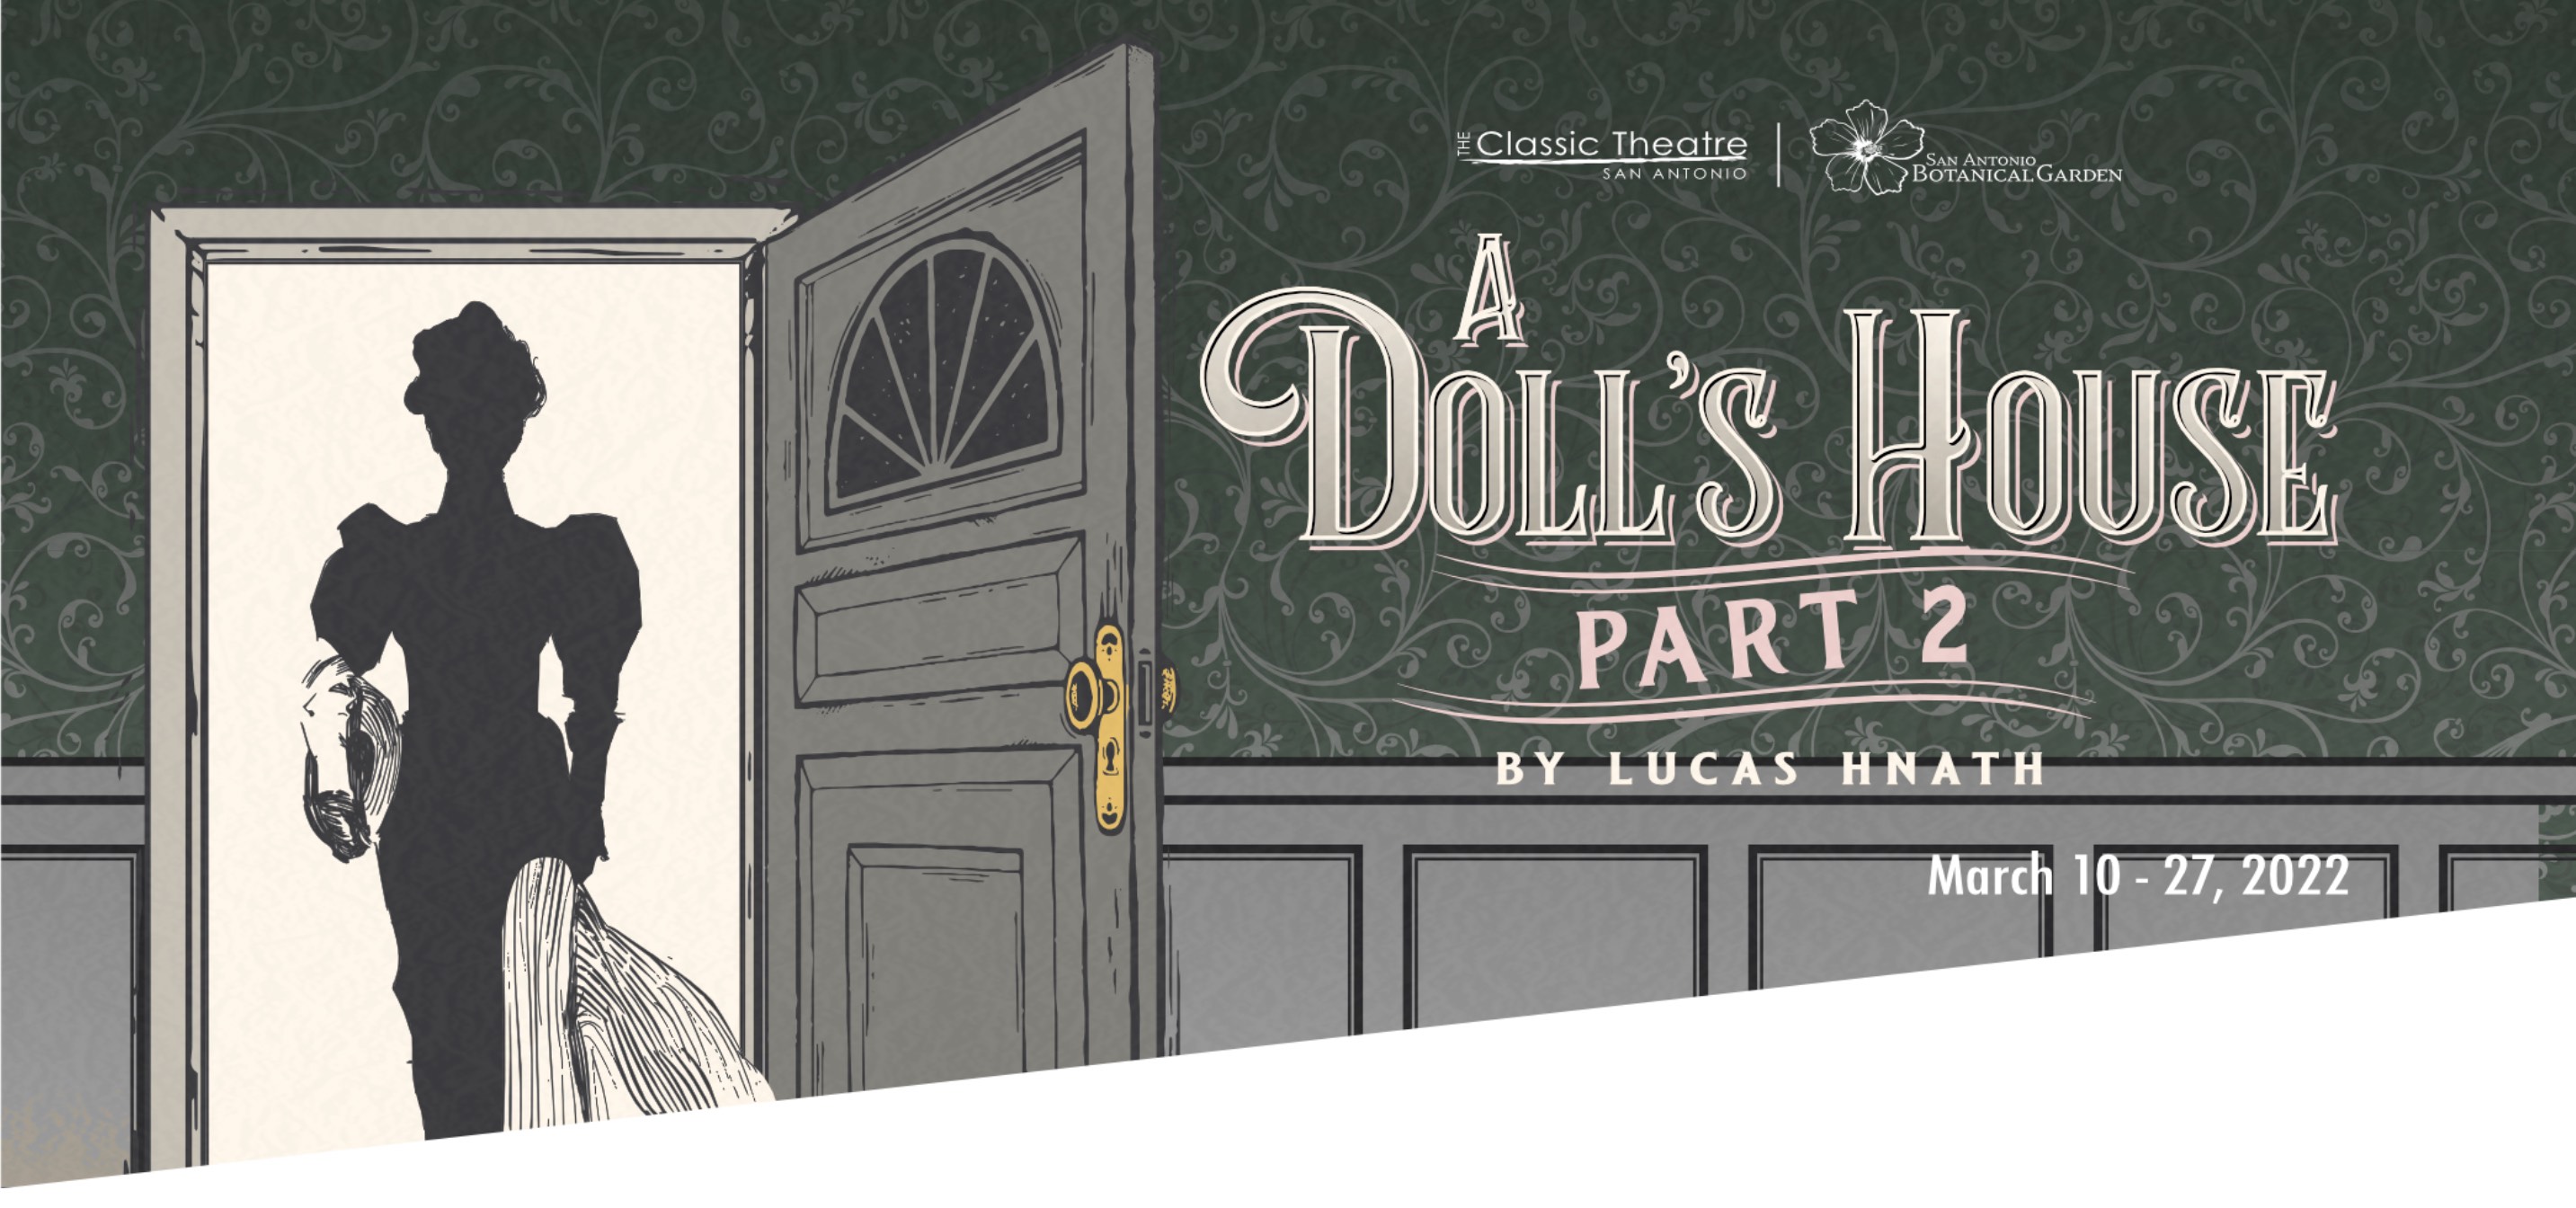 A Doll's House, Part 2 by Classic Theatre of San Antonio